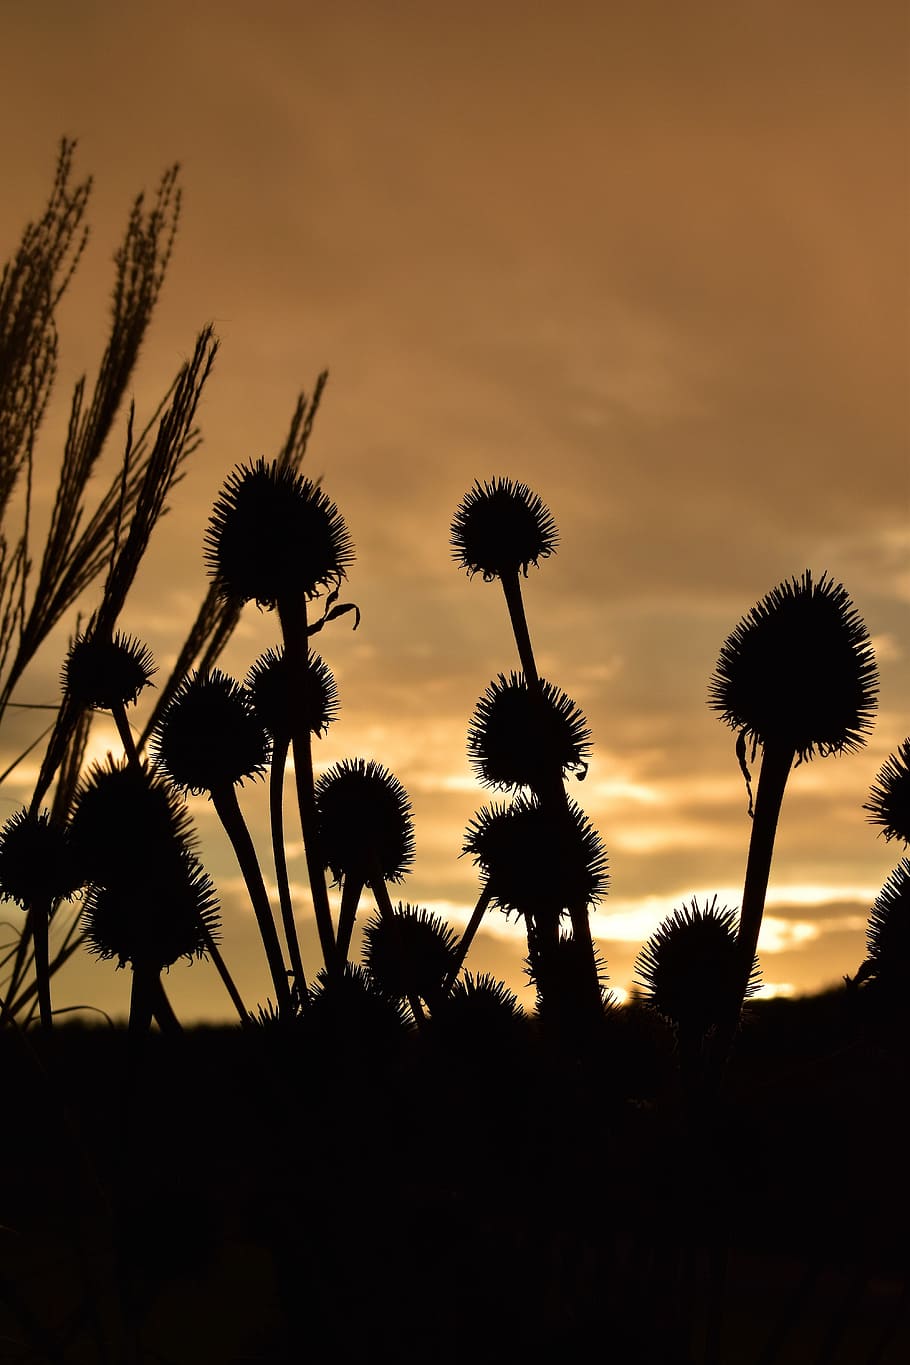 Morgenrot, Grasses, morgenstimmung, dried plants, back light, clouds, landscape, weather, echinacea, silhouette